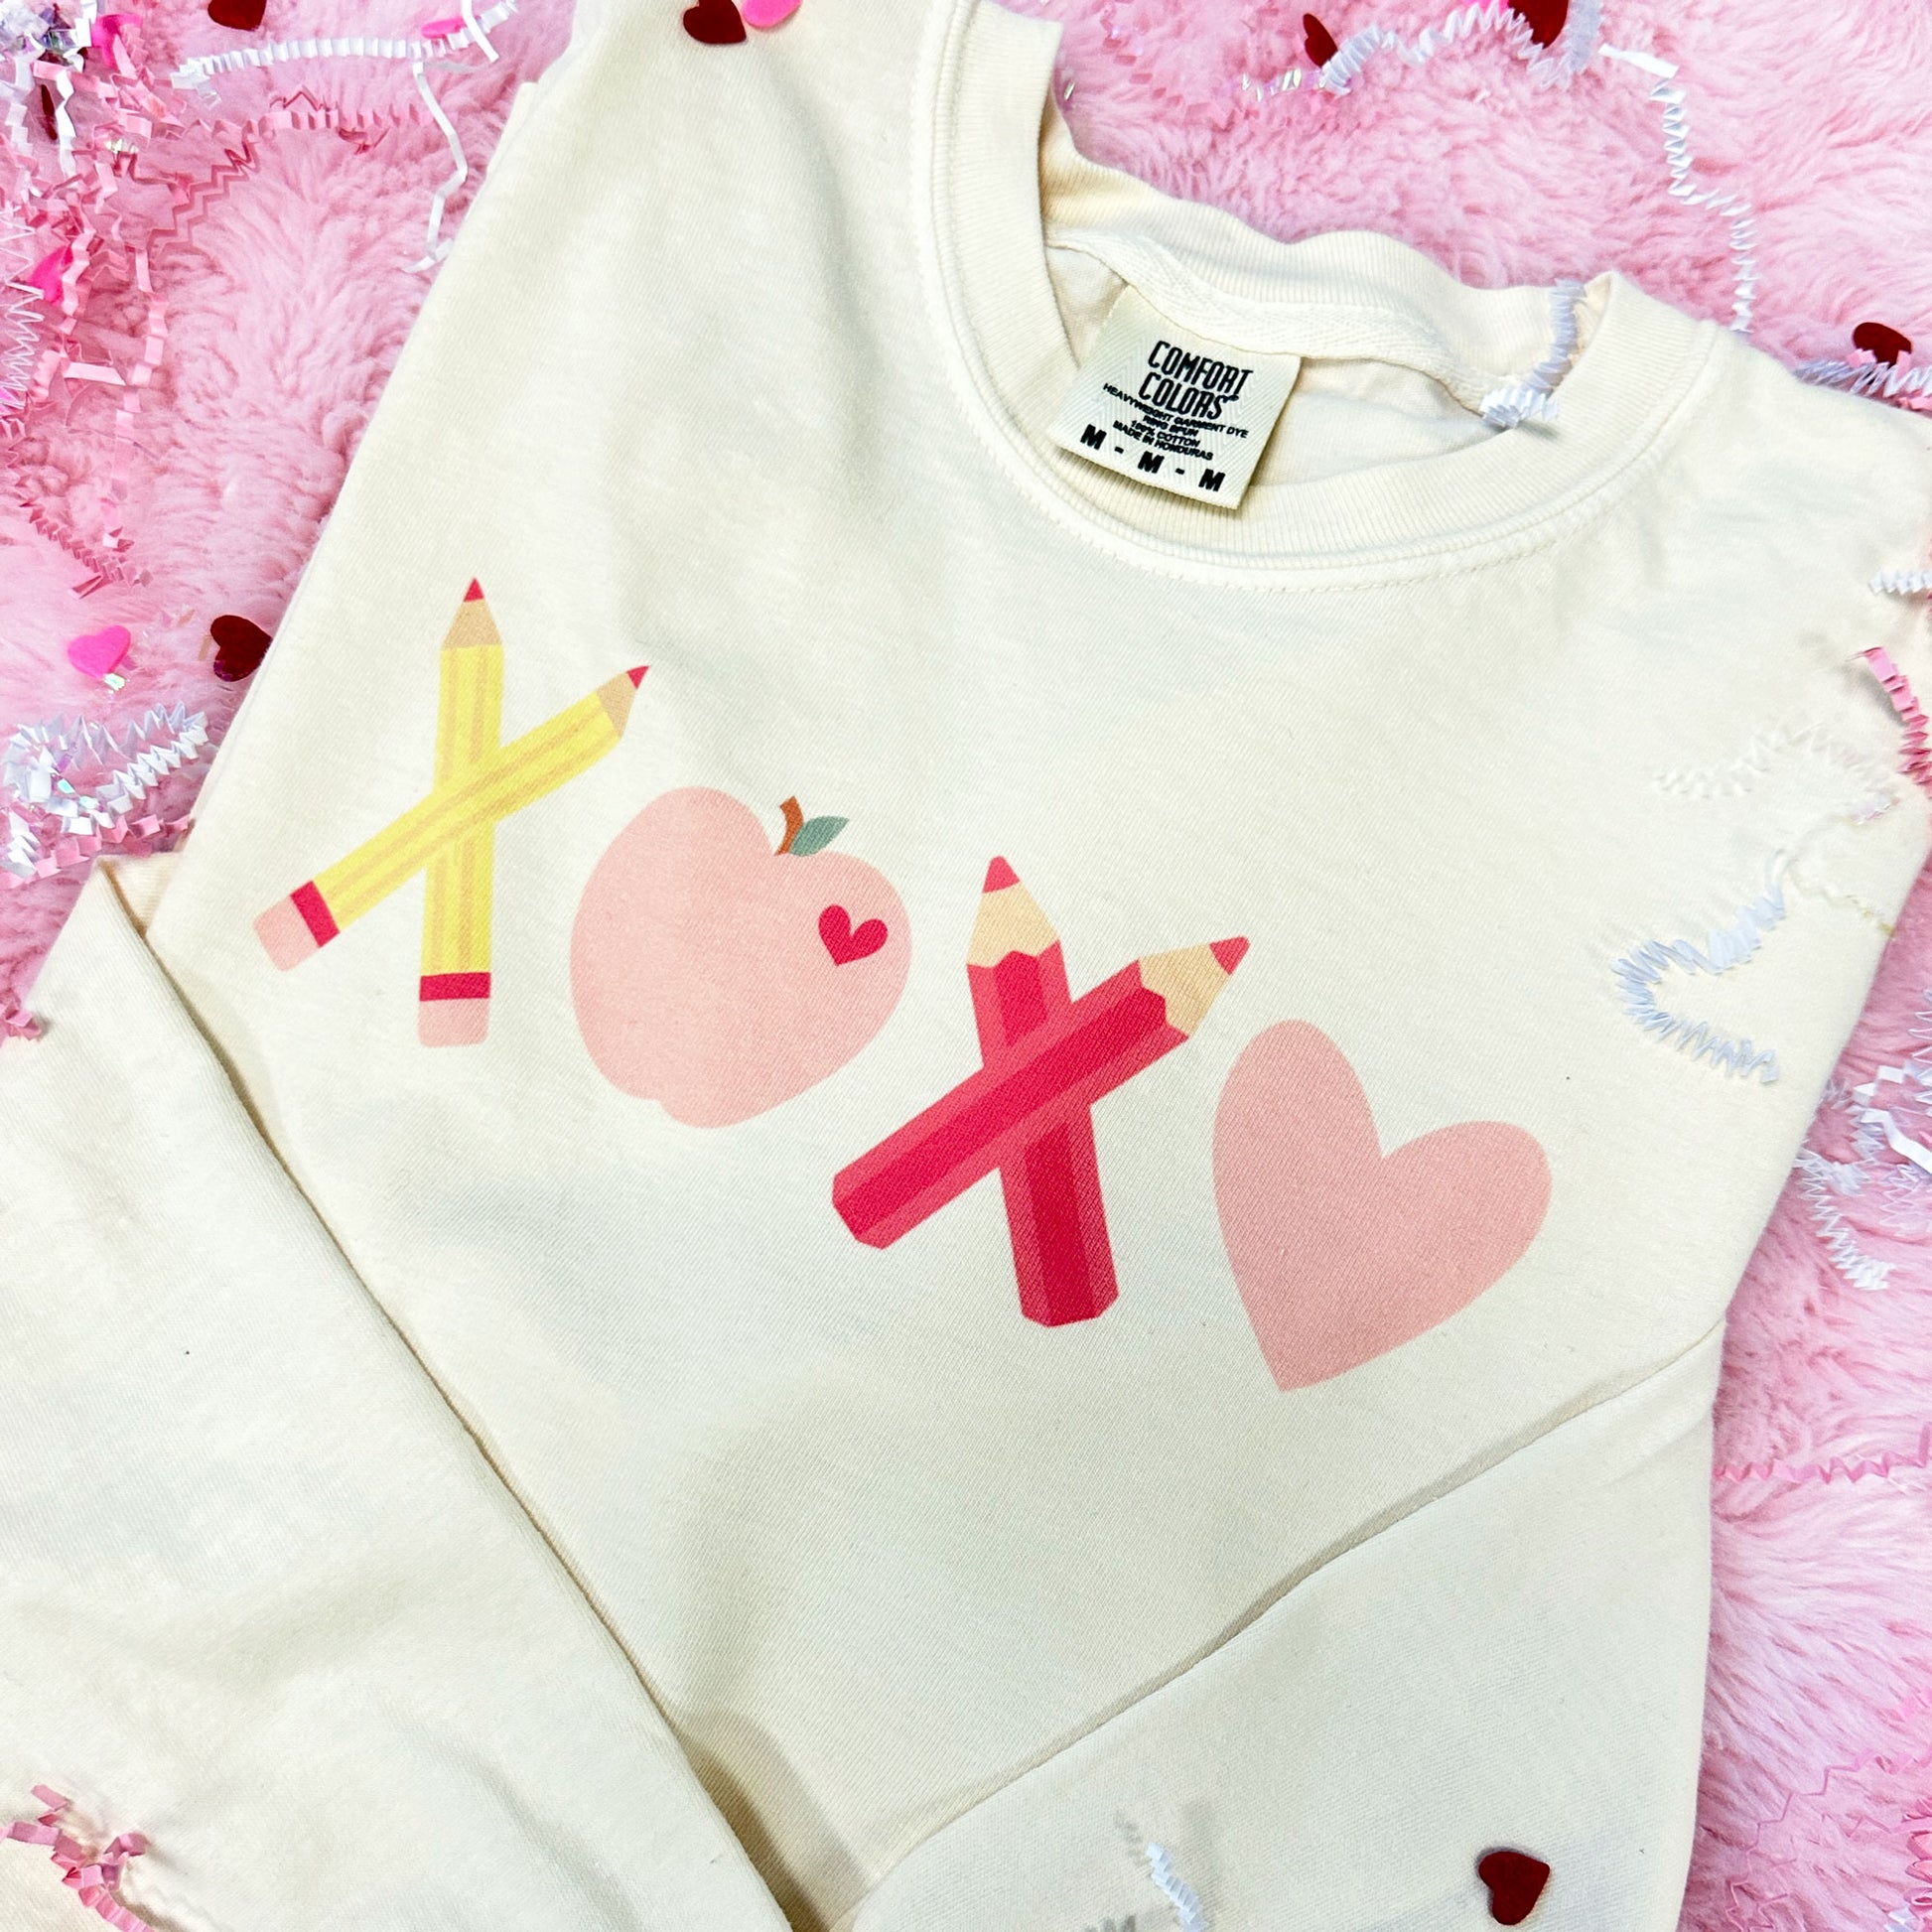 Ivory long sleeve comfort colors shirt with a cute XOXO design made out of school supplies, apple, and heart